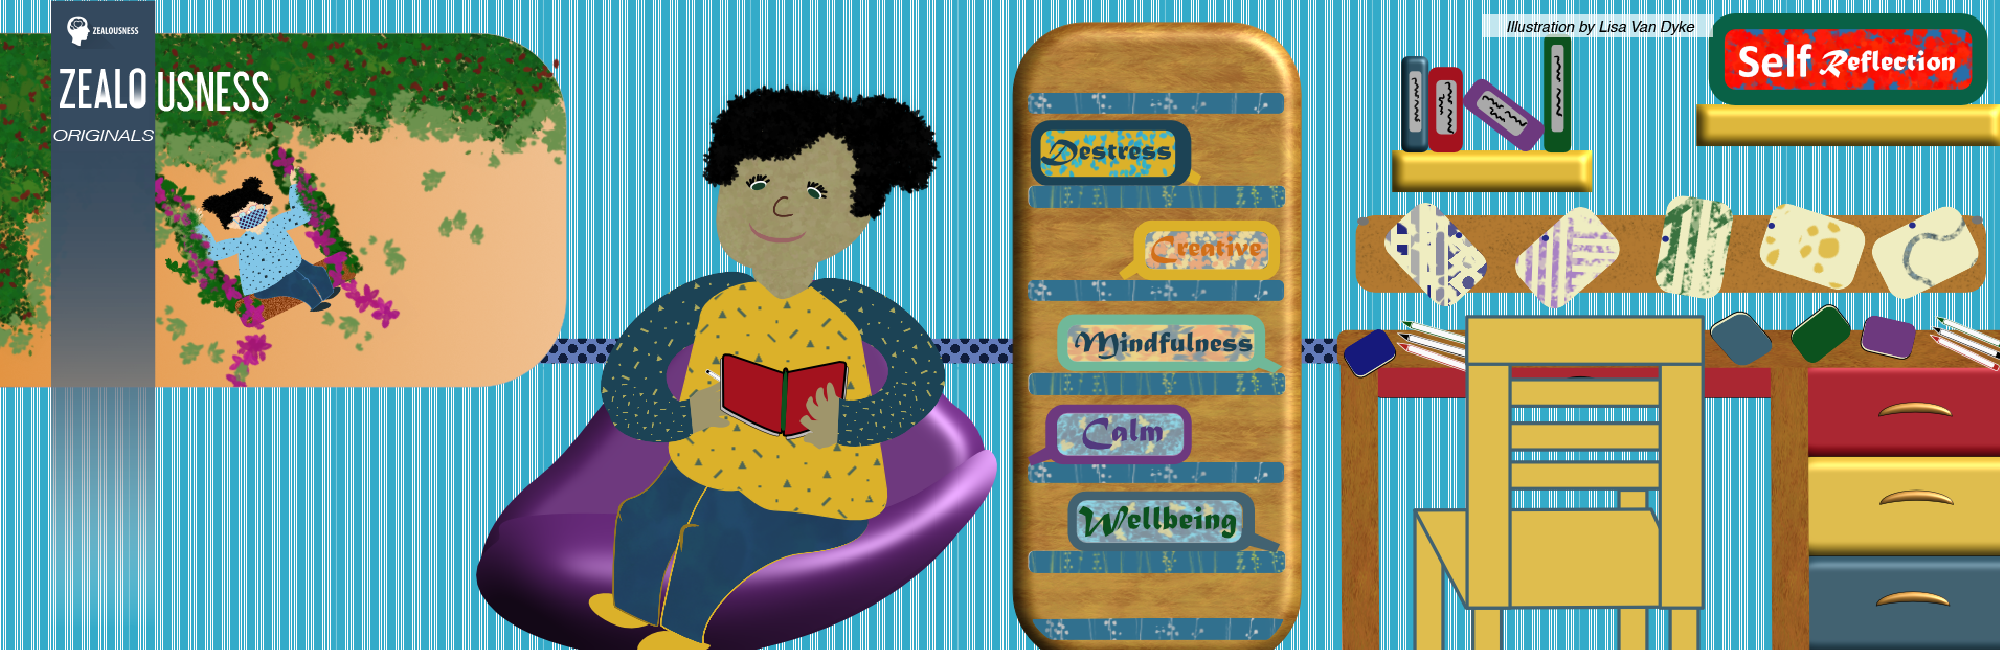 A black-haired woman is sitting in her cozy chair inside her room filled with fun patterns and books on mindfulness and self-reflection. A little kid can be seen swinging outdoors in from of the window.